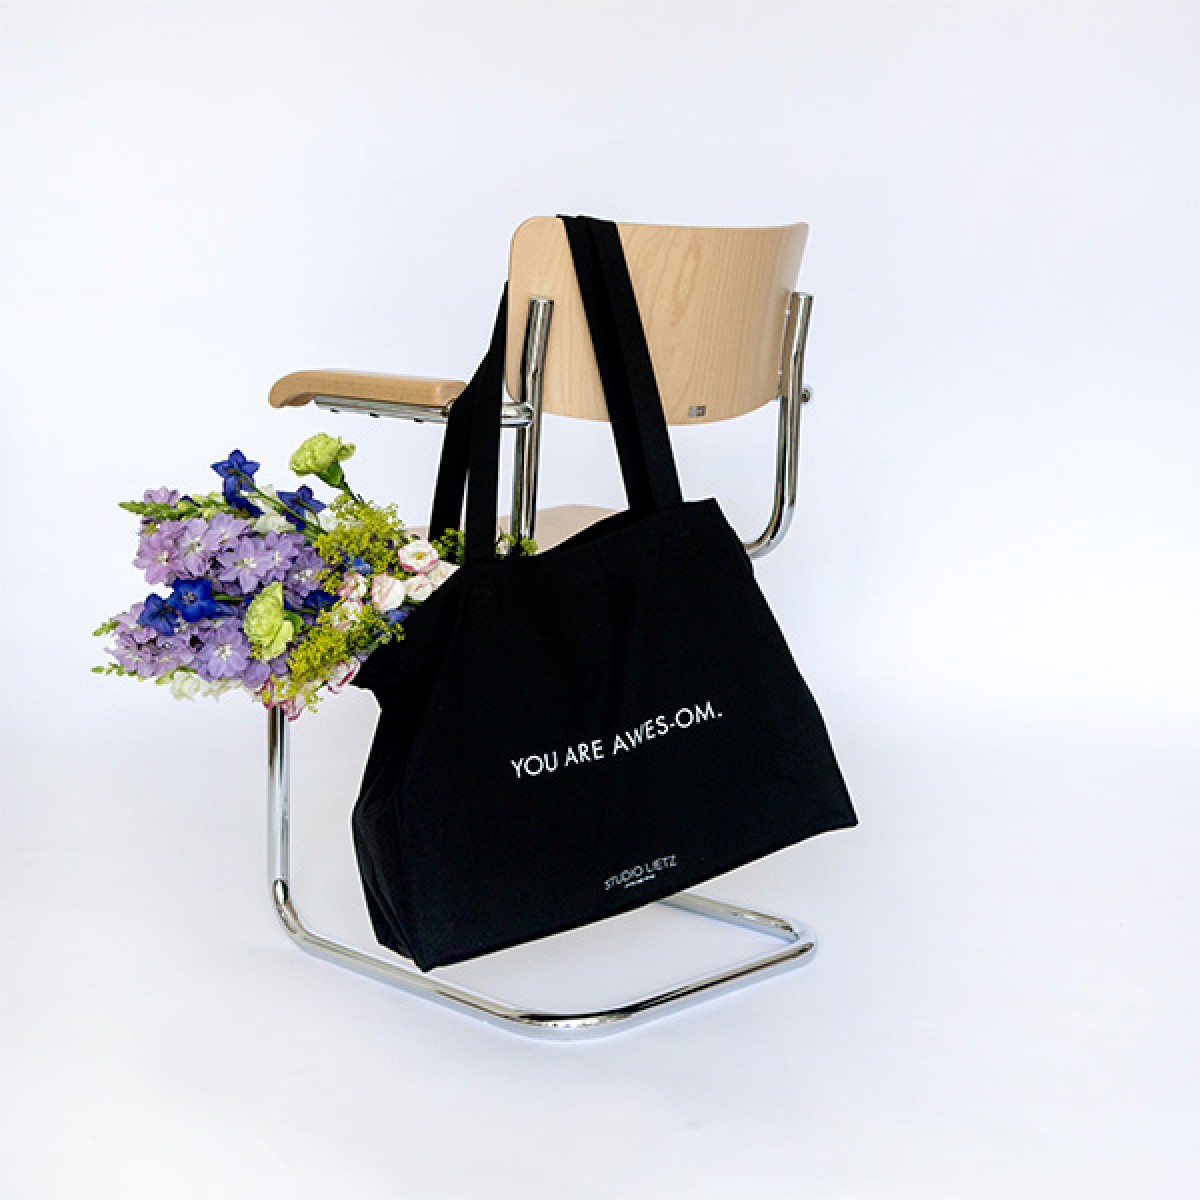 THE MAXI TOTE | YOU ARE AWES-OM. | STUDIO LIETZ